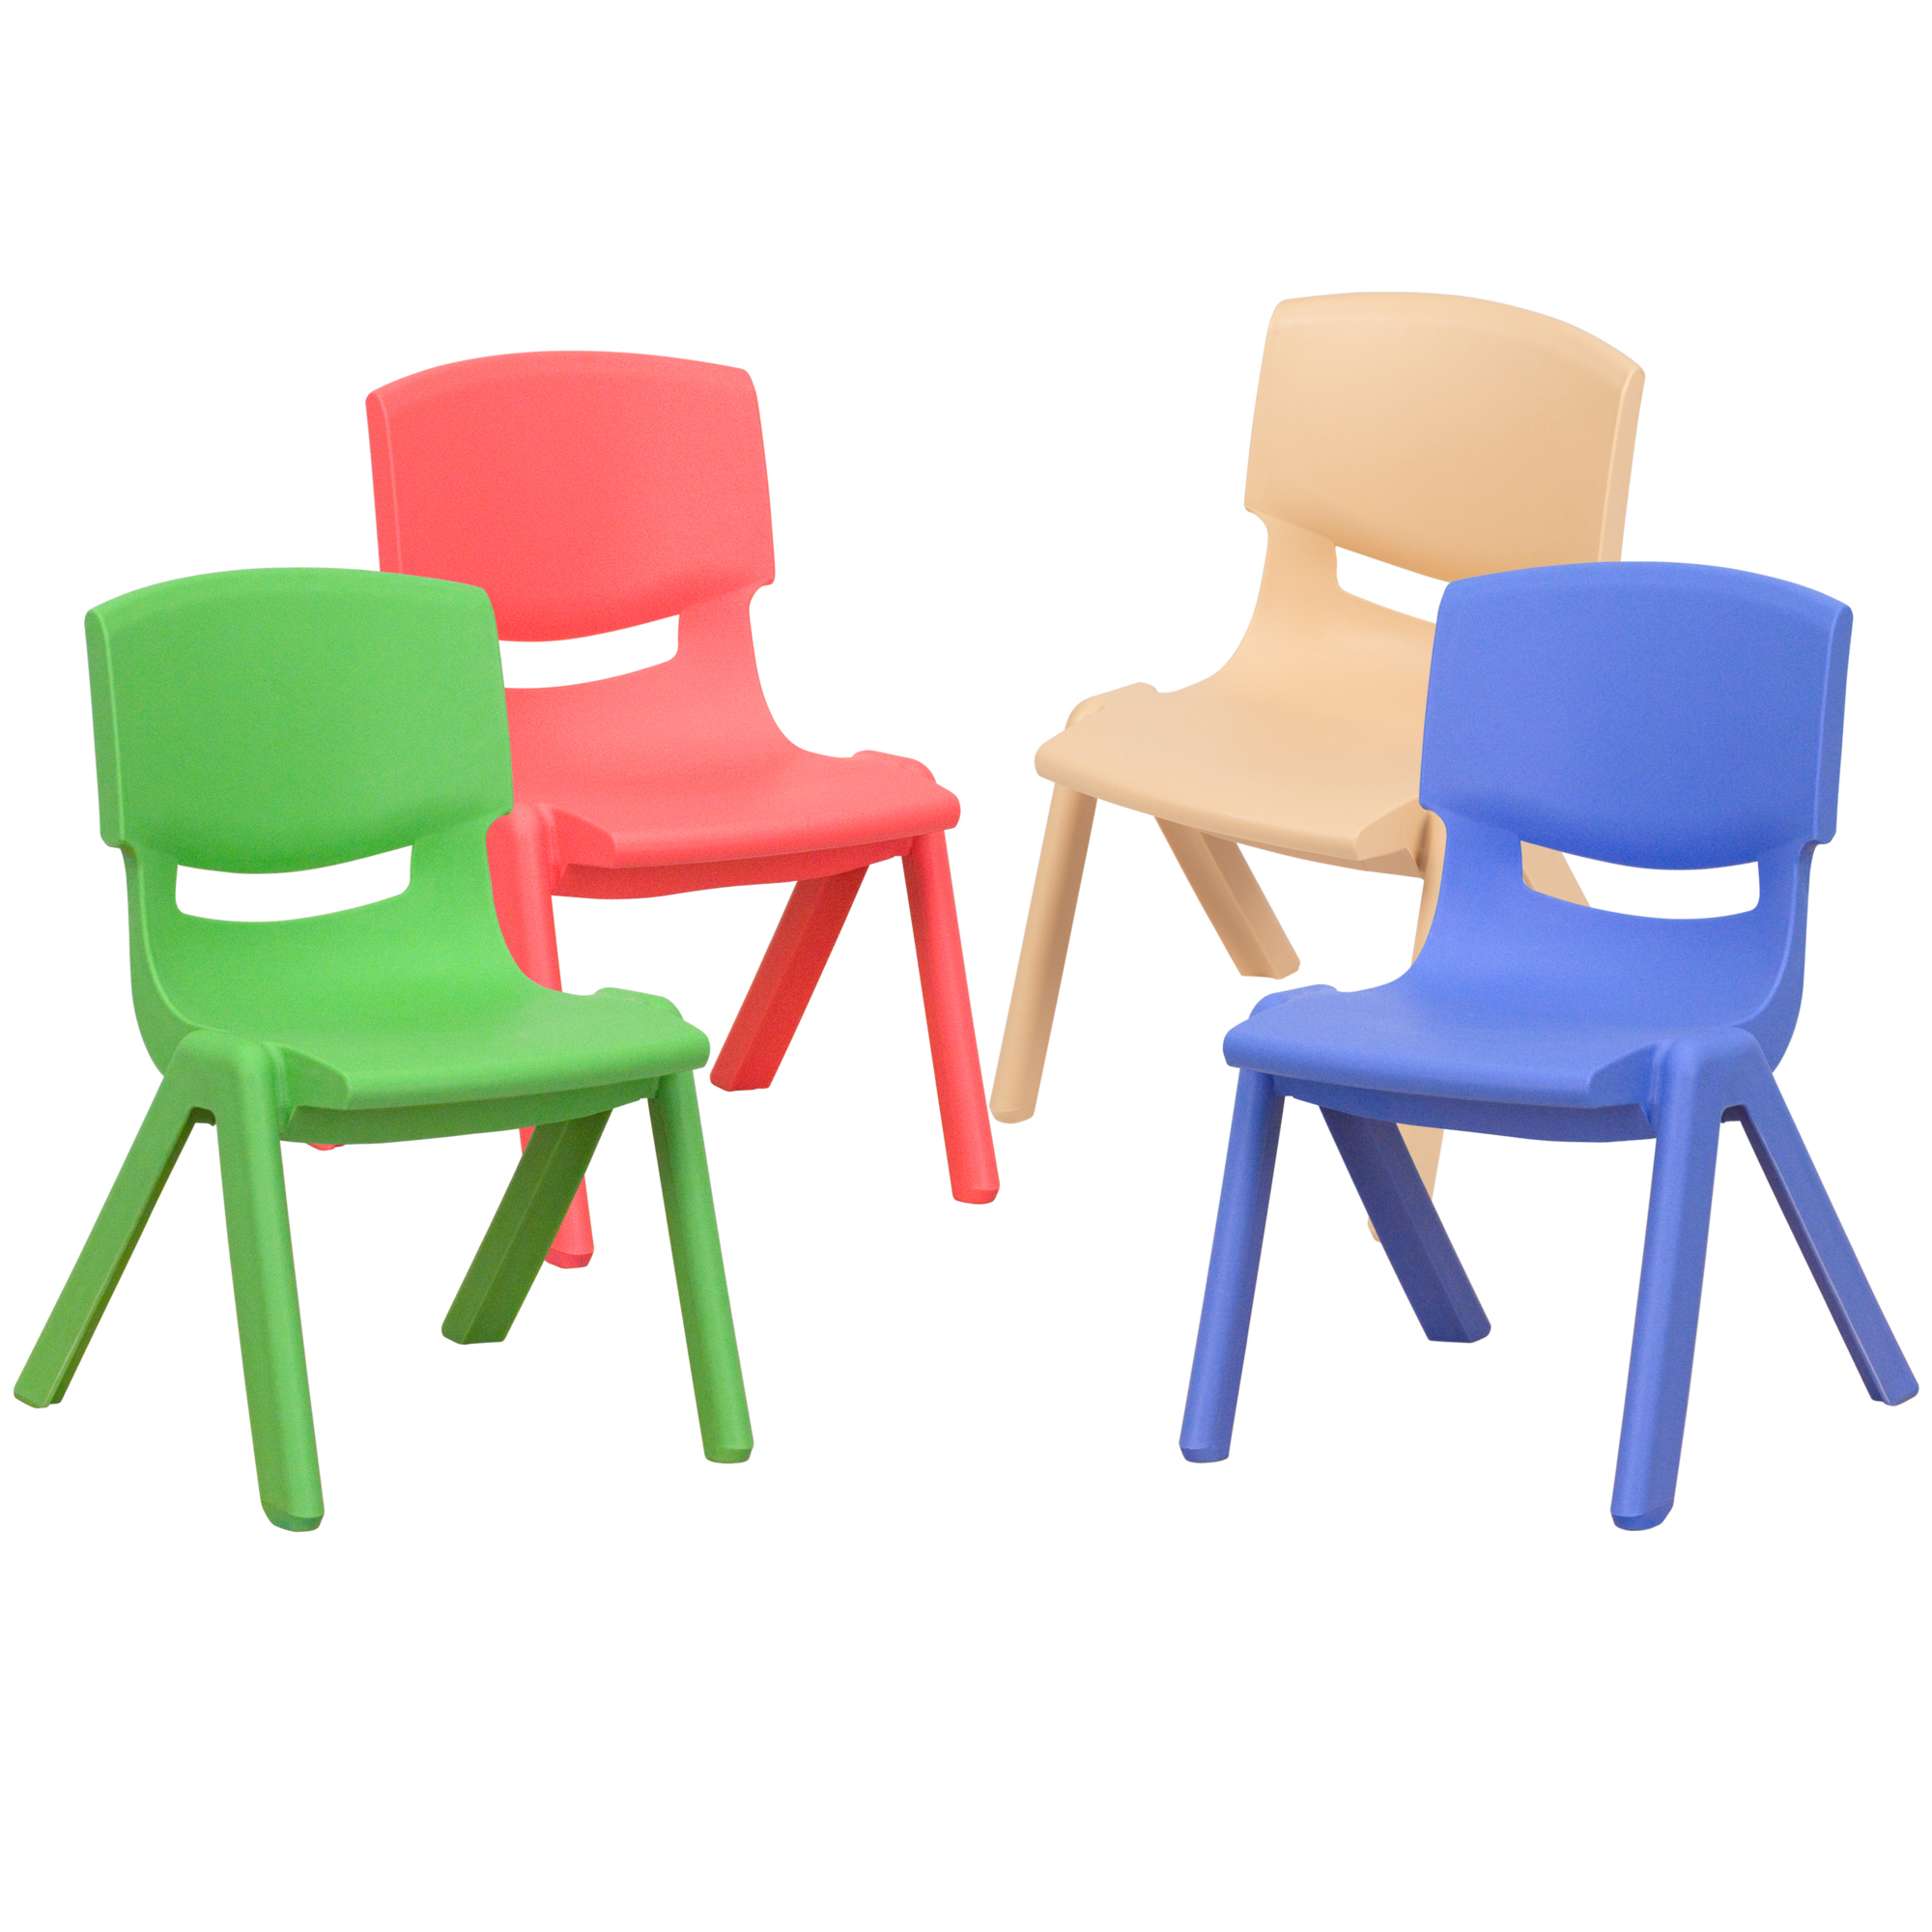 Flash Furniture, 4 Pack Plastic School Chair-10.5Inch H Seat, Assorted, Primary Color Other, Included (qty.) 4, Model 4YUYCX4003MULTI